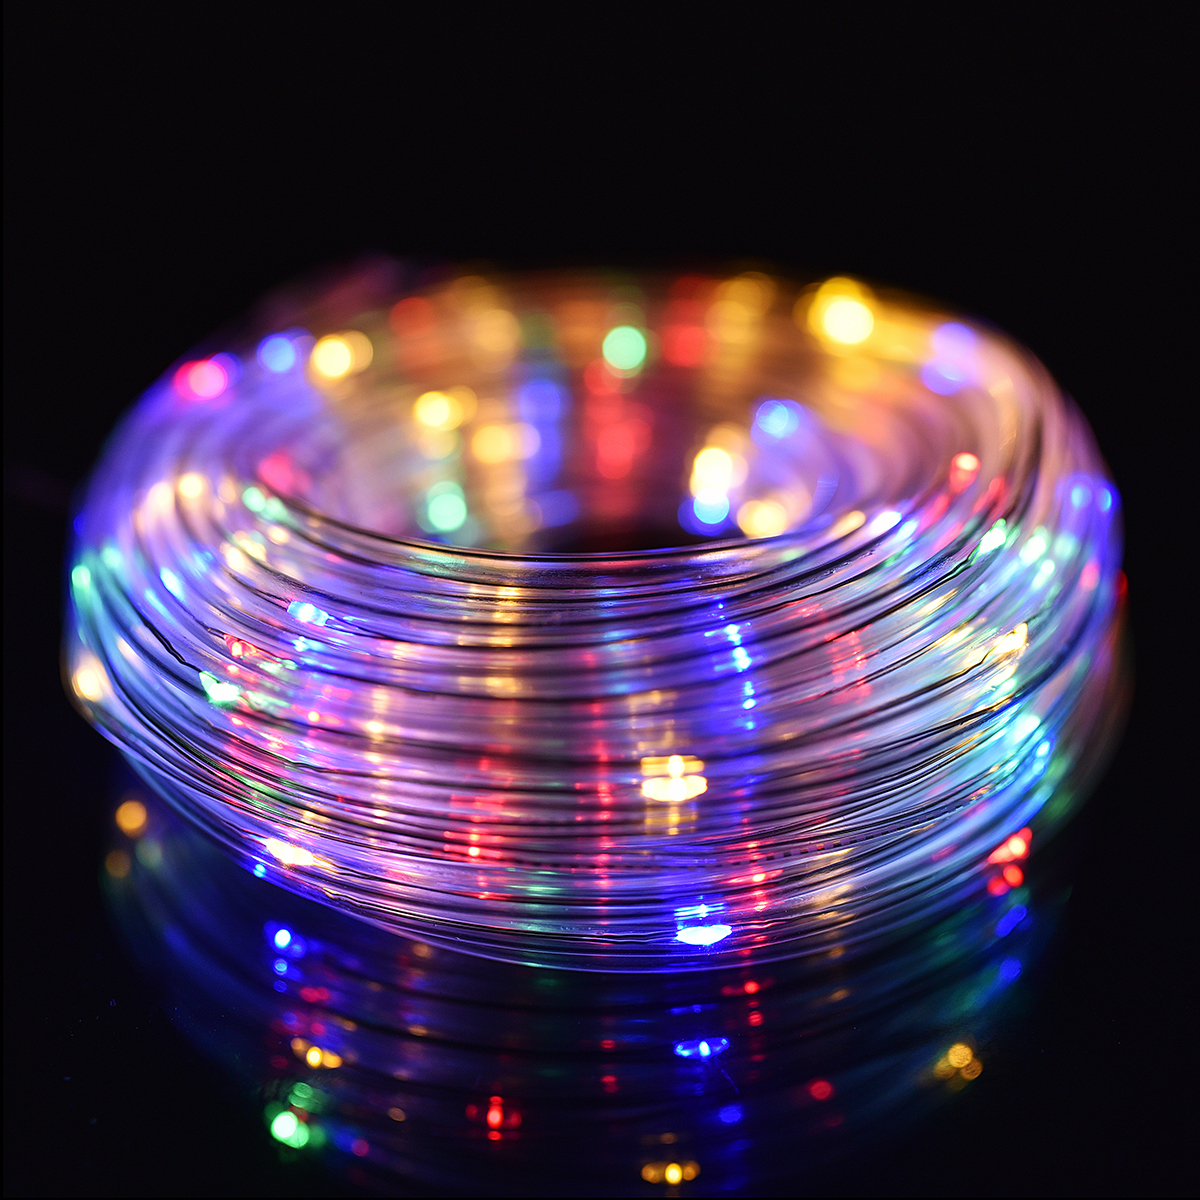 12M Battery Powered 120LED String Light 8 Modes Remote Control Fairy Lamp Party Christmas Home Decor